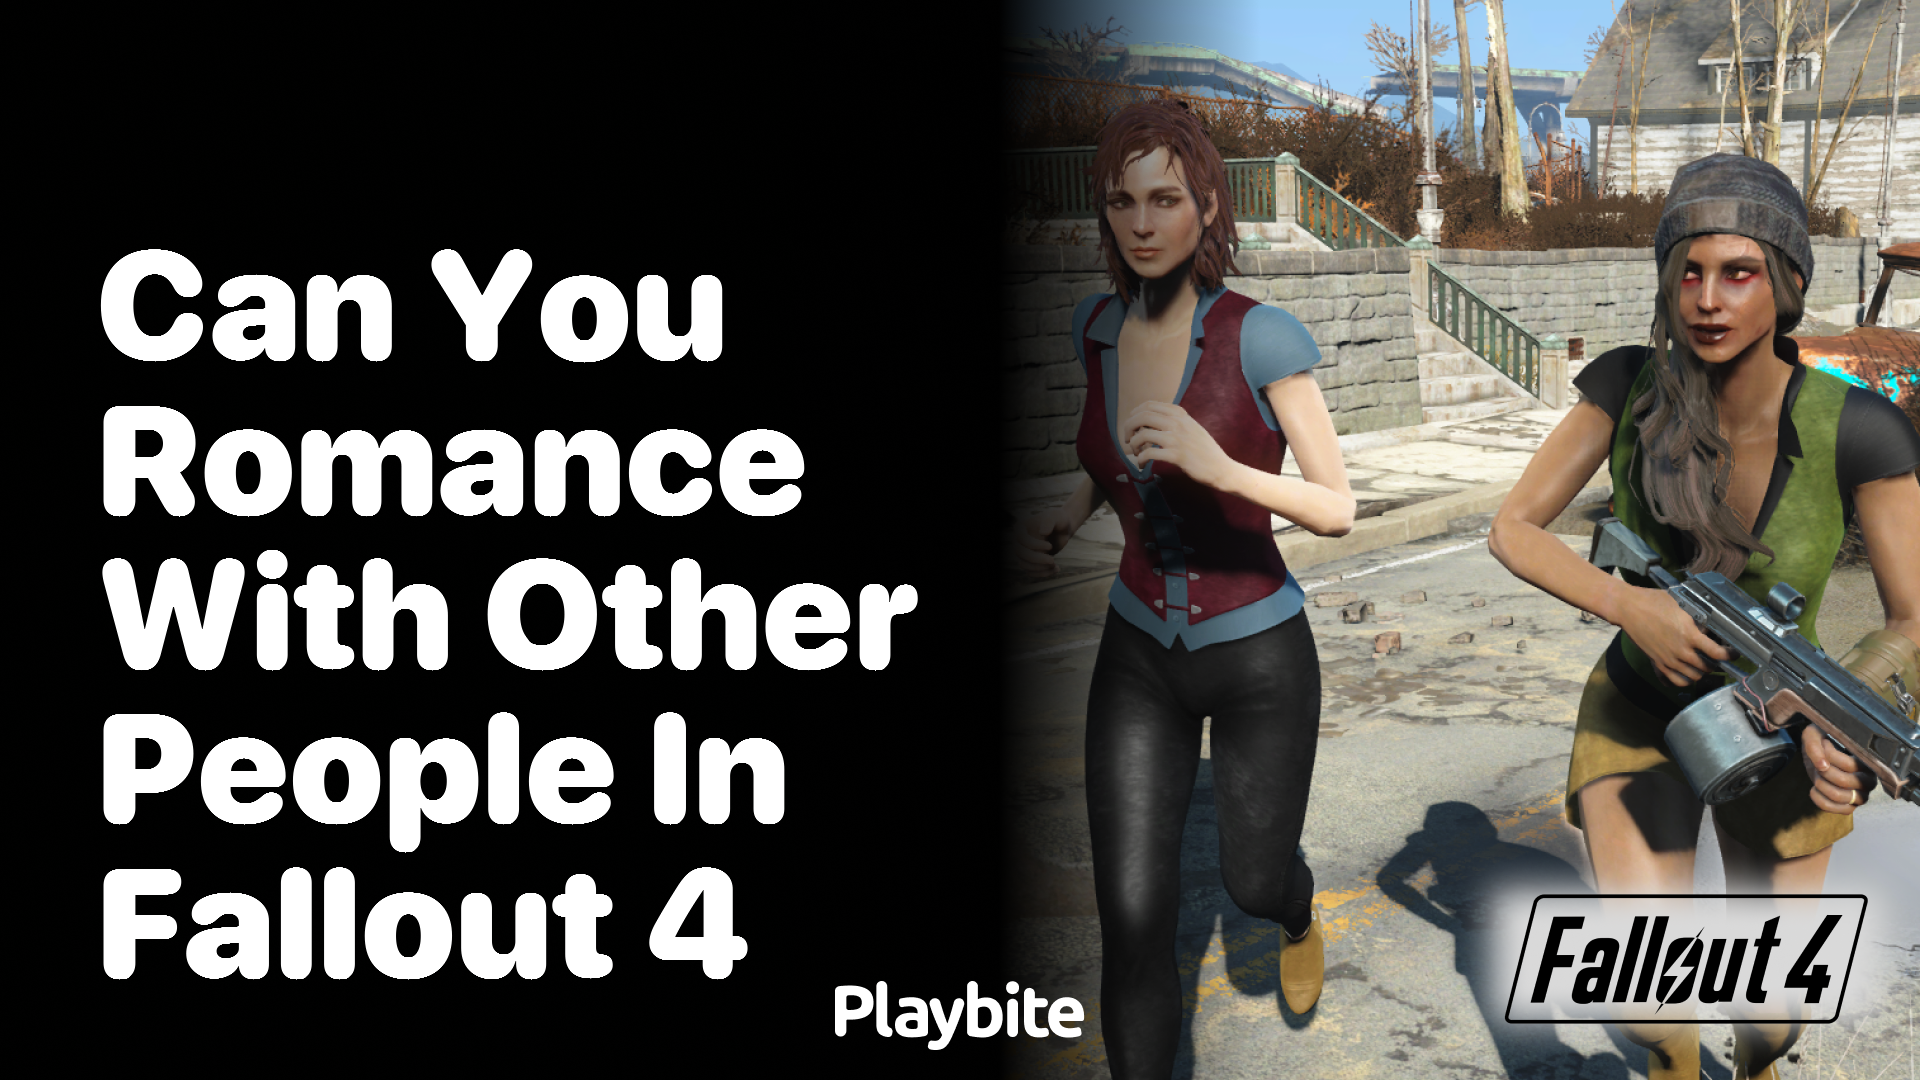 Can you romance with other people in Fallout 4?